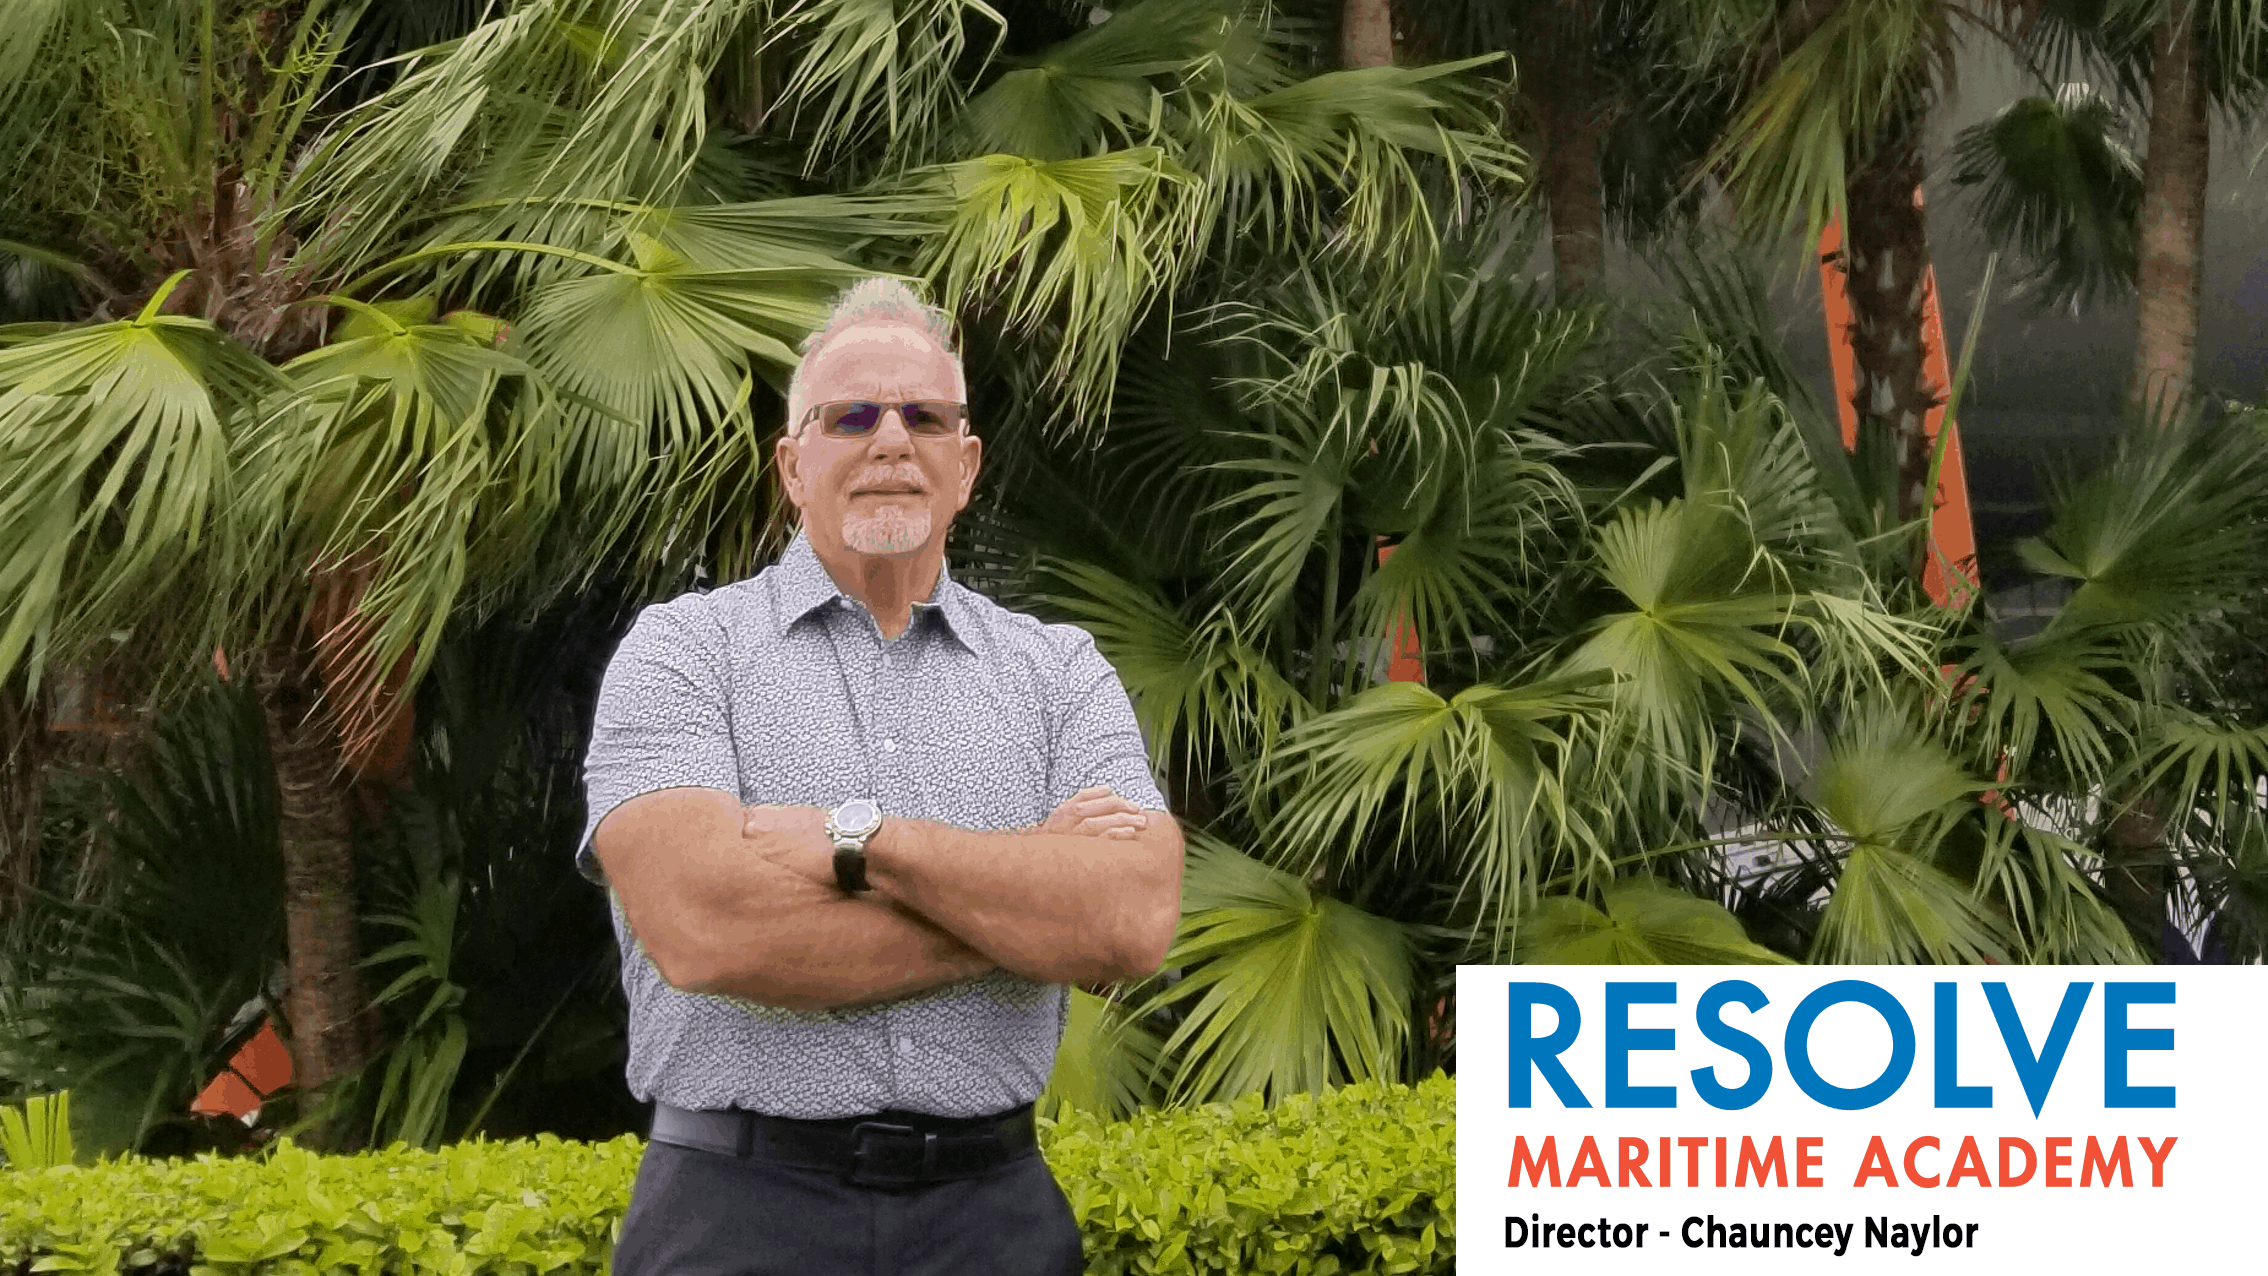 Chauncey Naylor Named Director at Resolve Maritime Academy